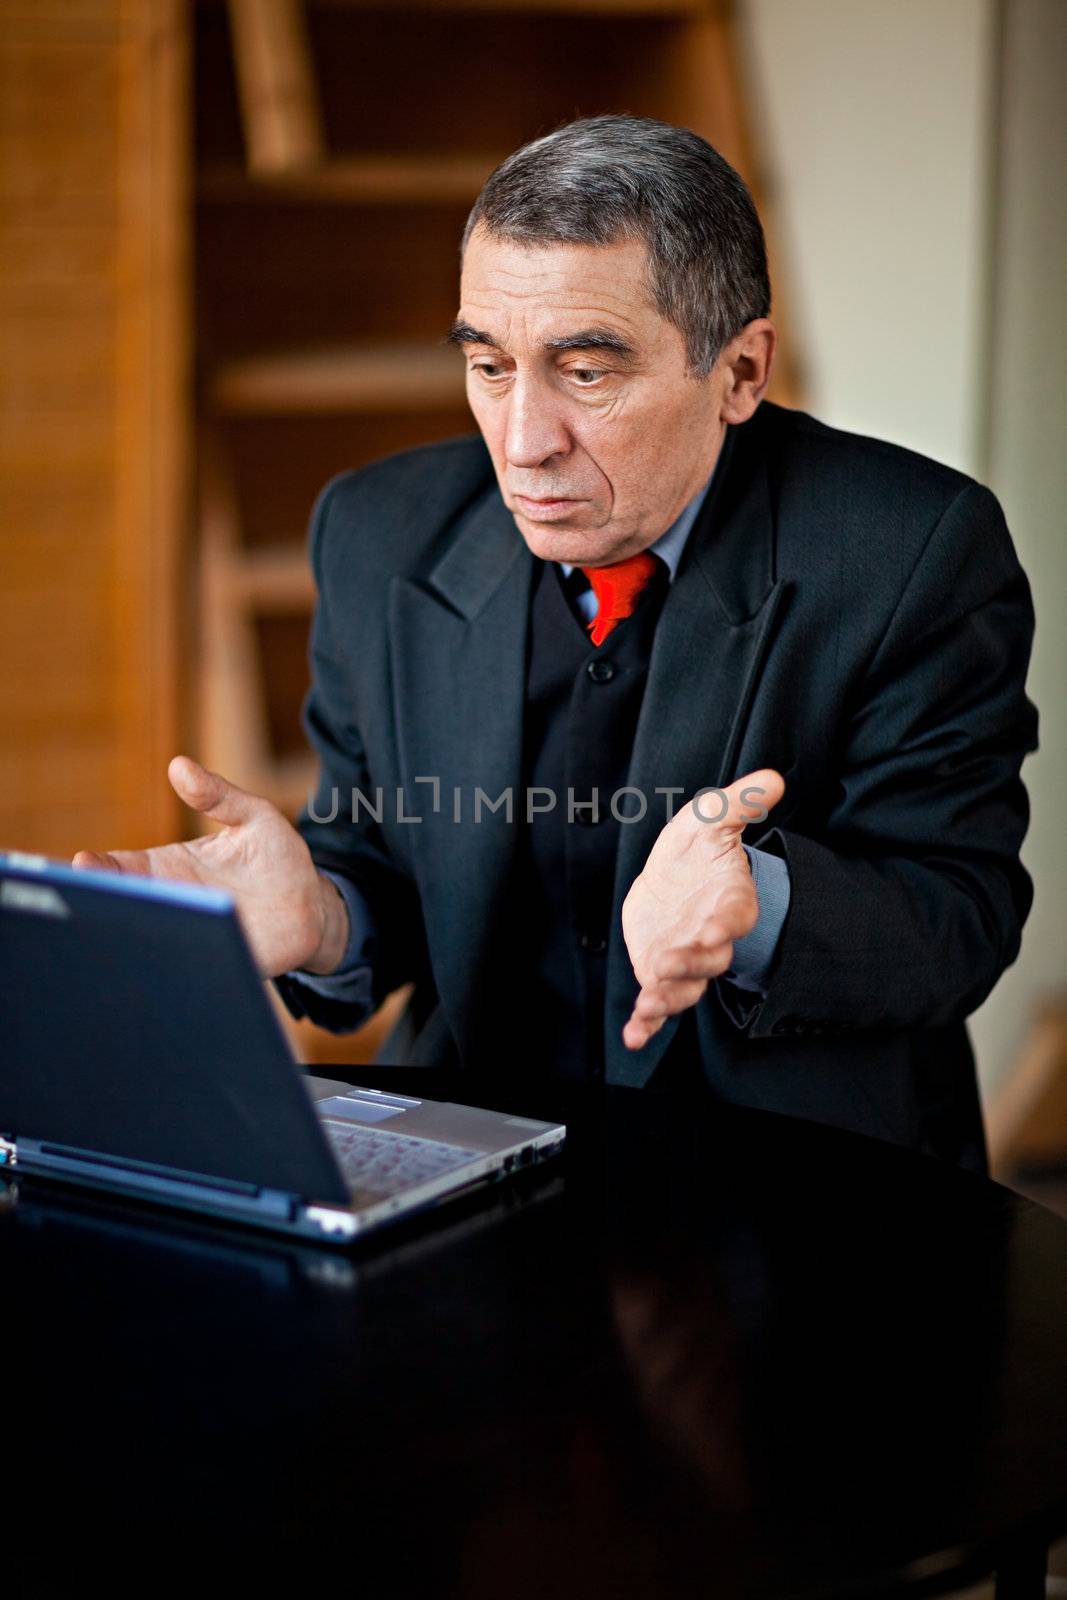 A businessman recoils from his laptop computer in horror.
